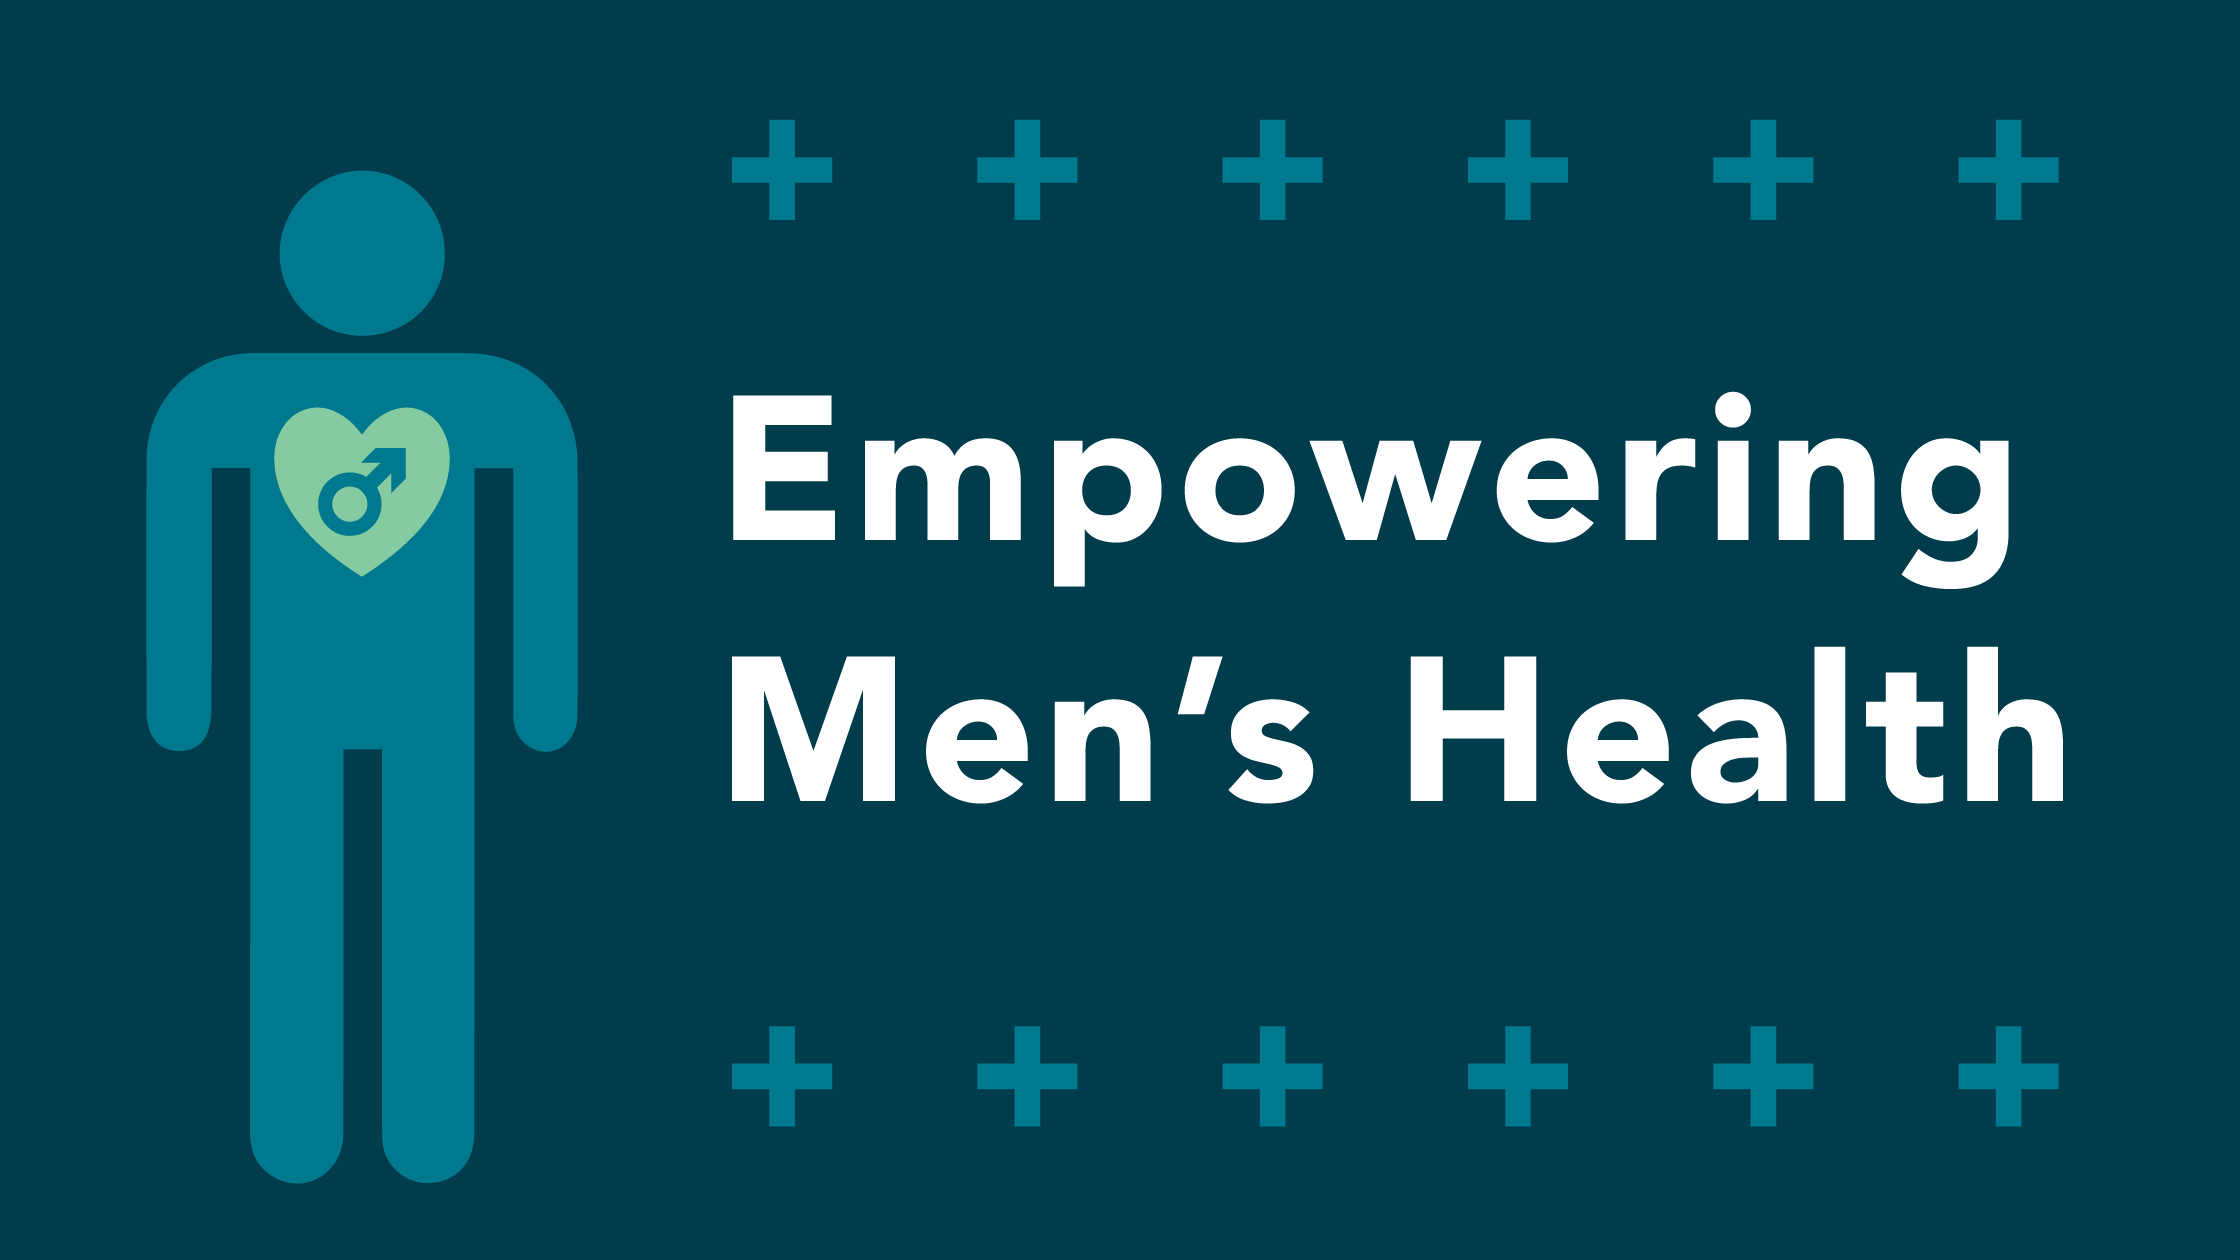 Dark blue background with a graphic of a man with heart and symbol for male teal plus signs surrounds text that reads Empowering Men's Health